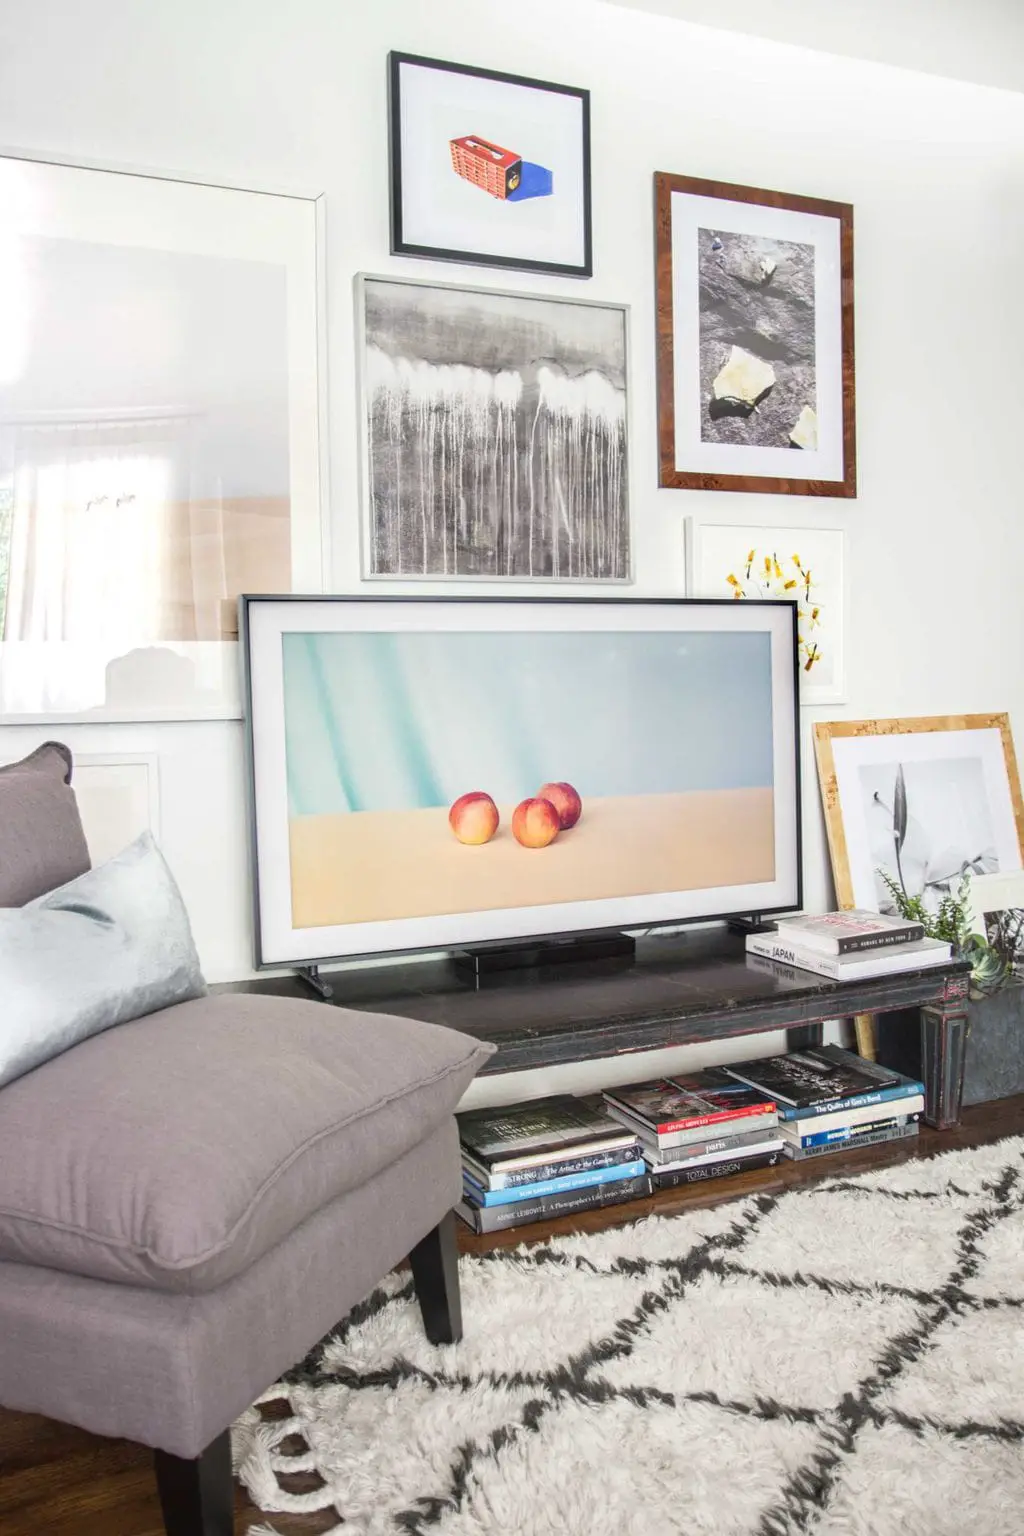 Framed TV screen with gallery wall and curated art selection for The Frame by Samsung on Thou Swell @thouswellblog